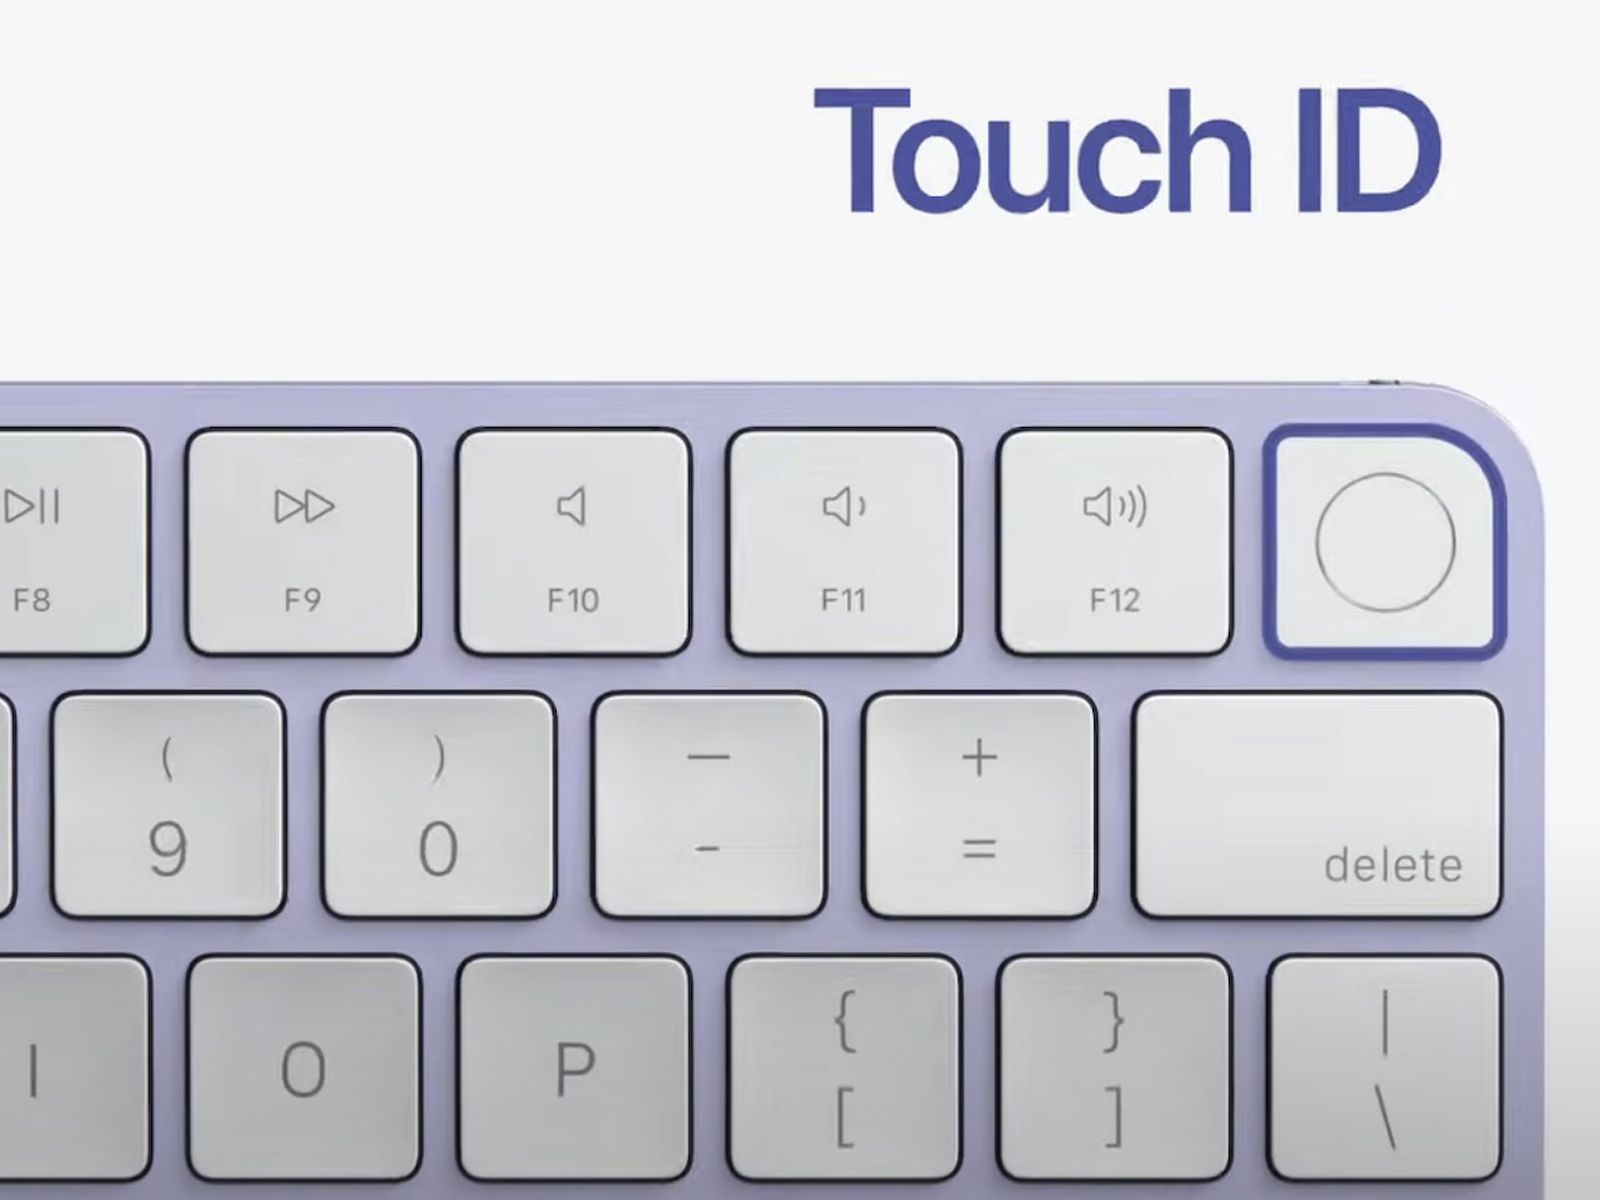 How To Use Touch ID On IMac